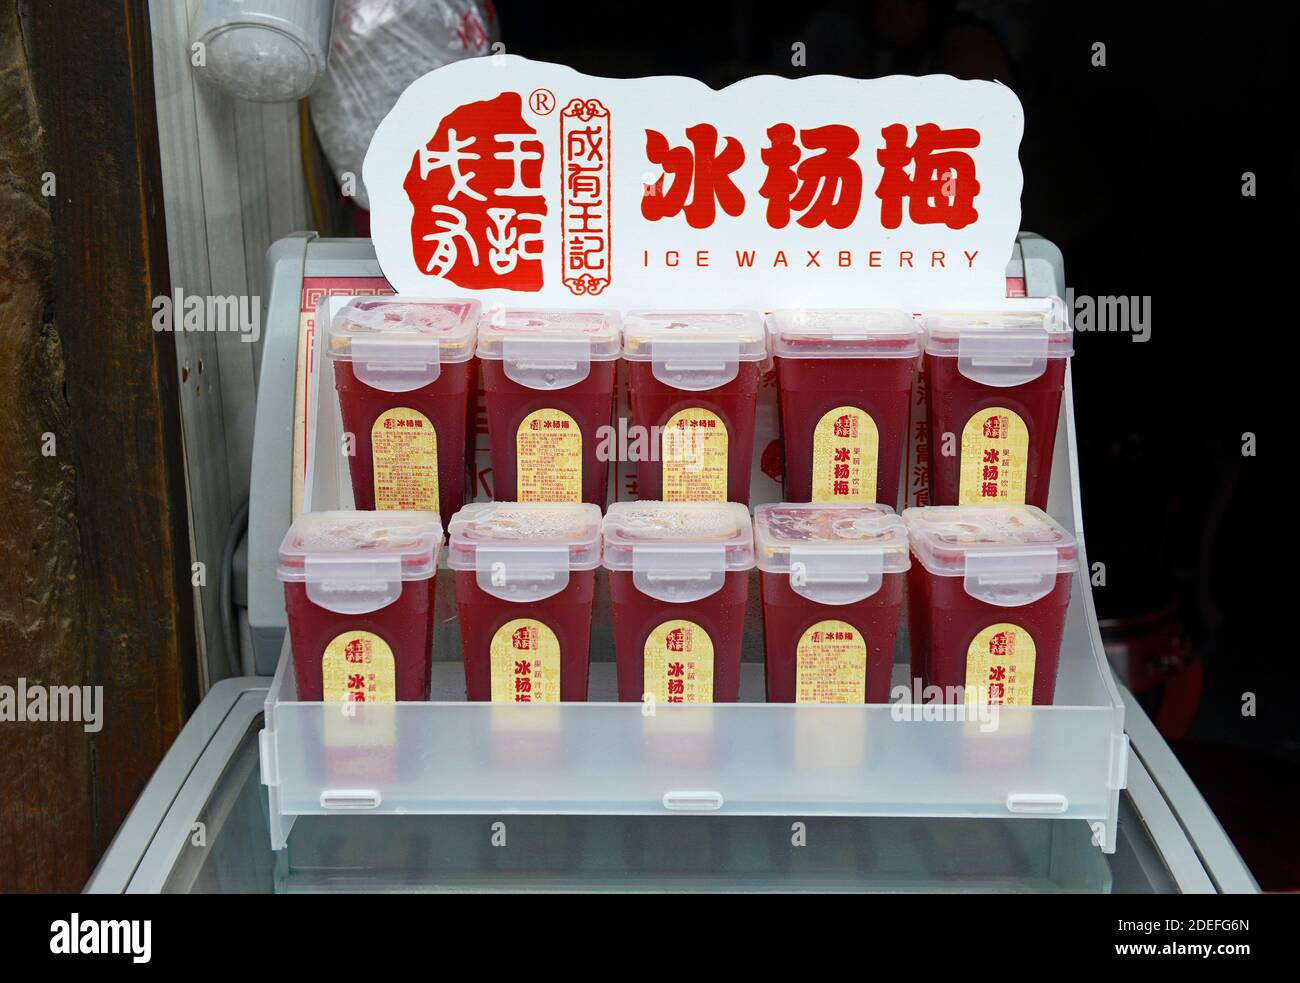 Tubs of iced waxberry slush drink for sale in Qingyan ancient town near Guiyang, China. Waxberry is high in antioxidants and vitamins C and E. Stock Photo